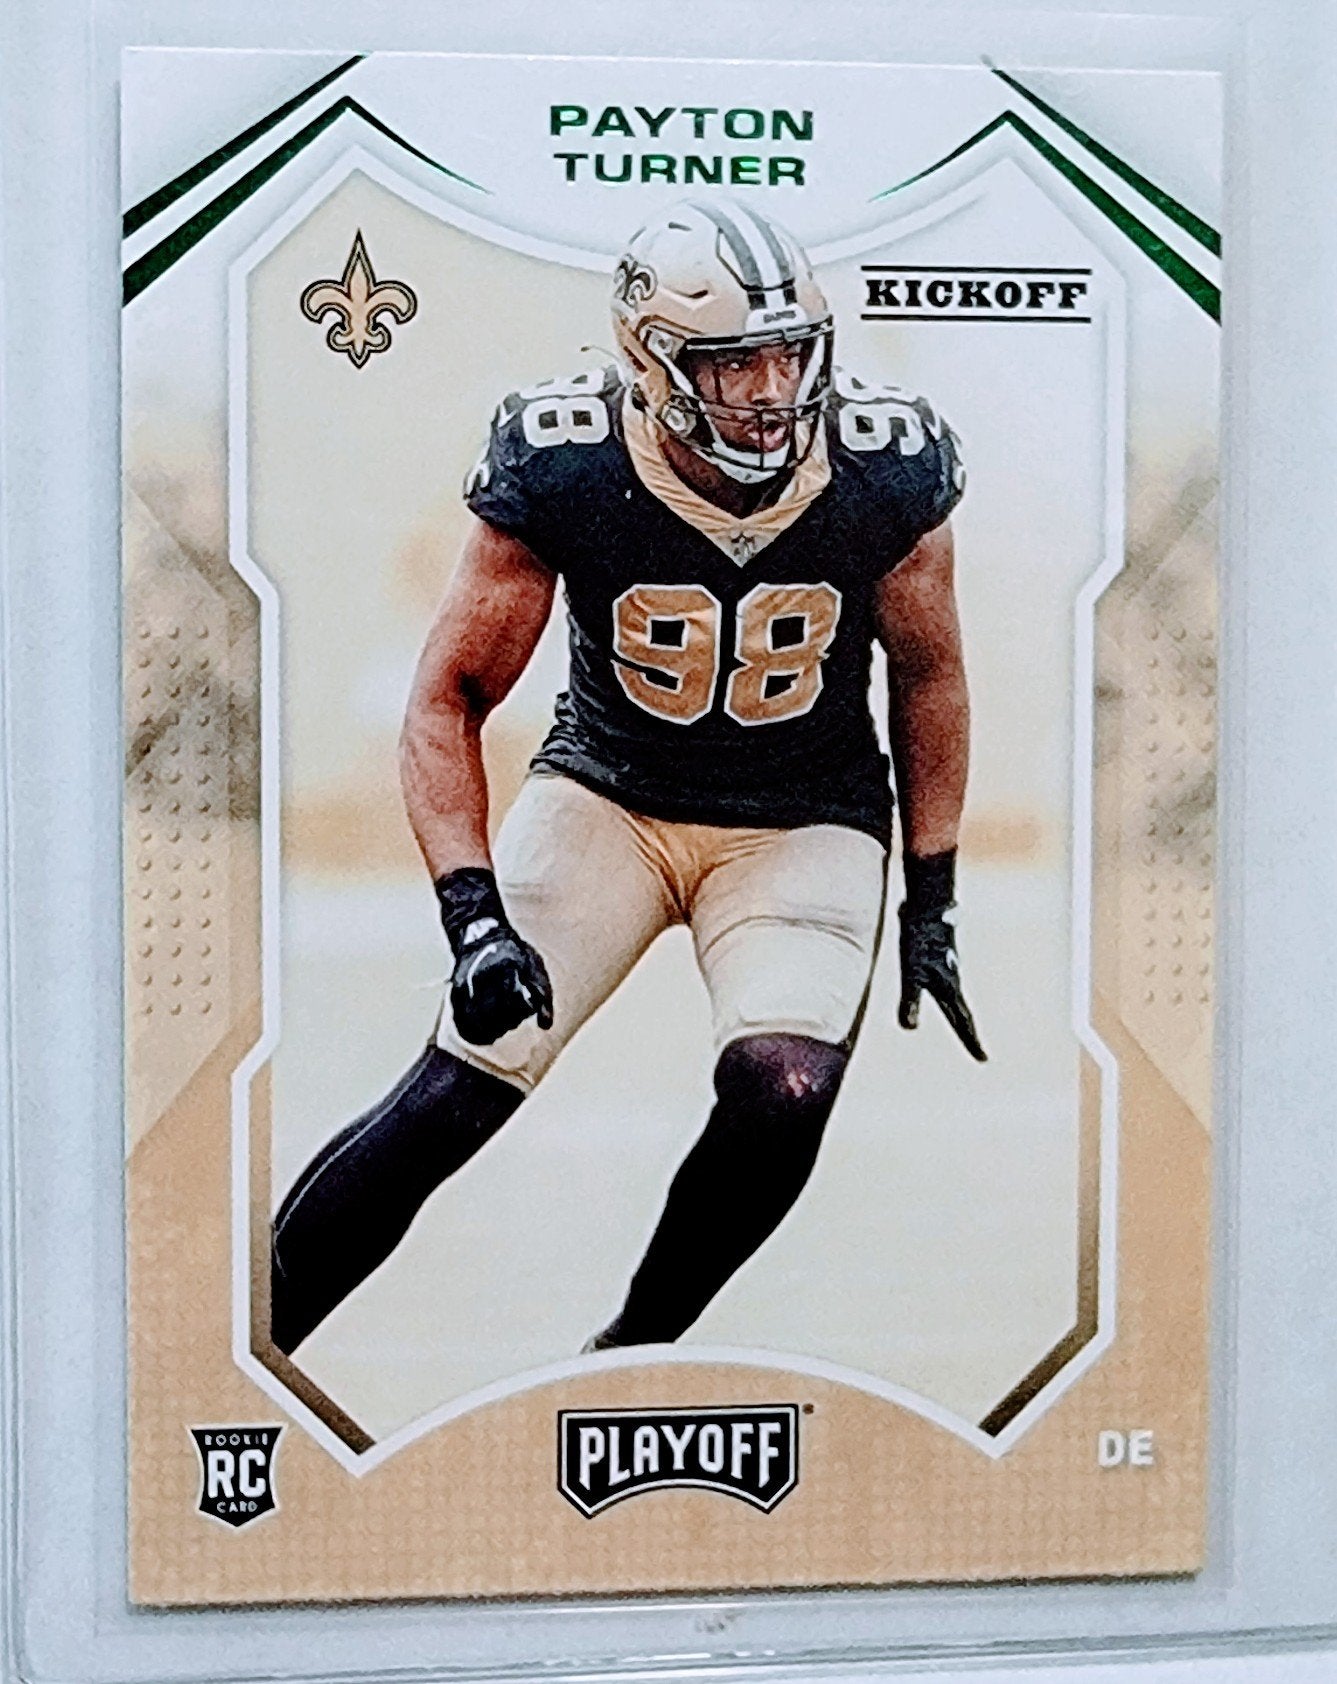 2021 Panini Playoff Payton Turner Kickoff Insert Green Rookie Football Card AVM1 simple Xclusive Collectibles   